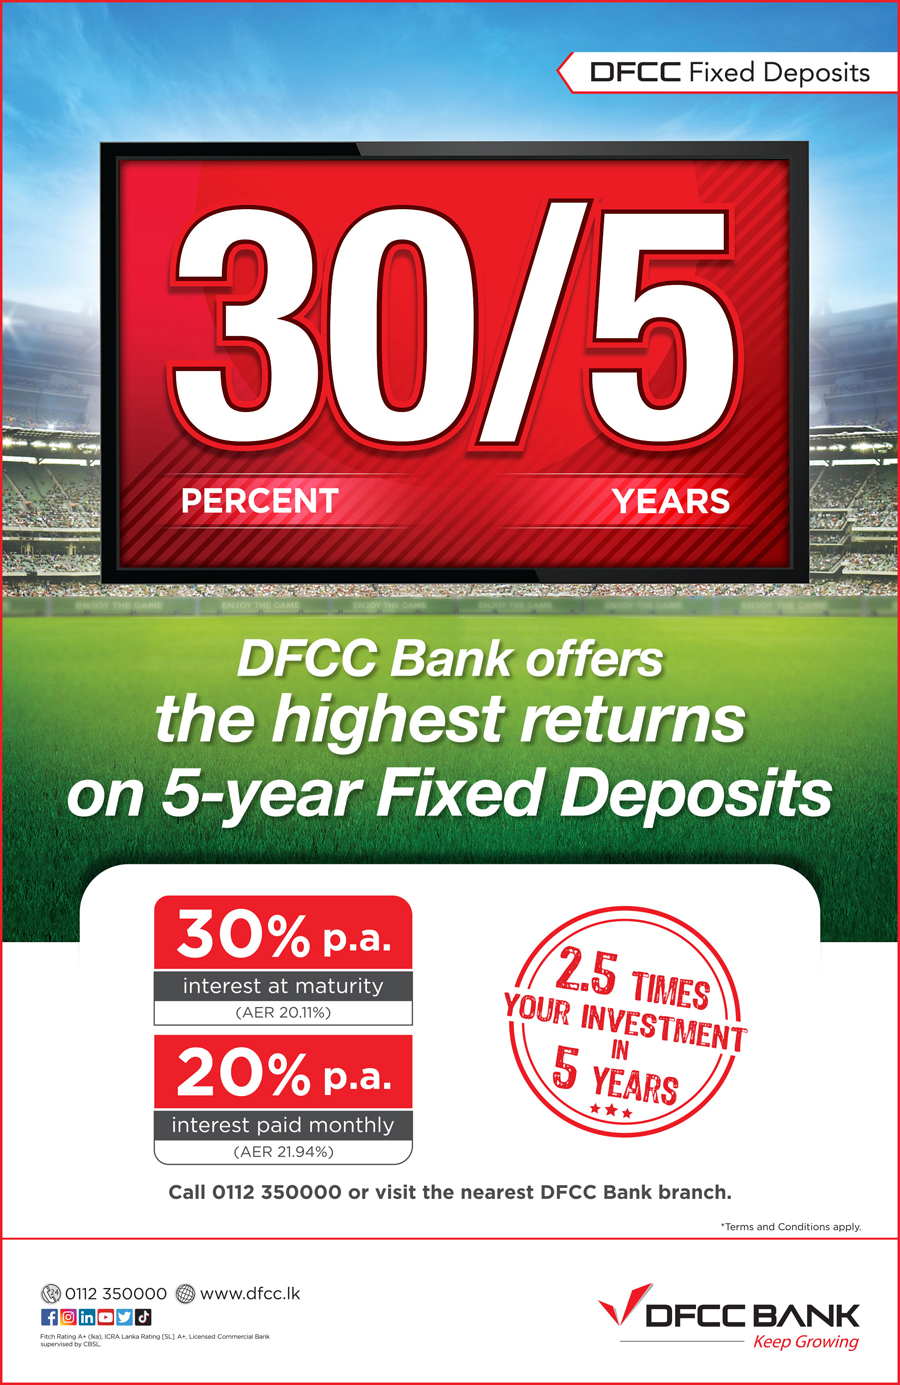 DFCC Bank offers the highest returns for 05 year fixed deposits